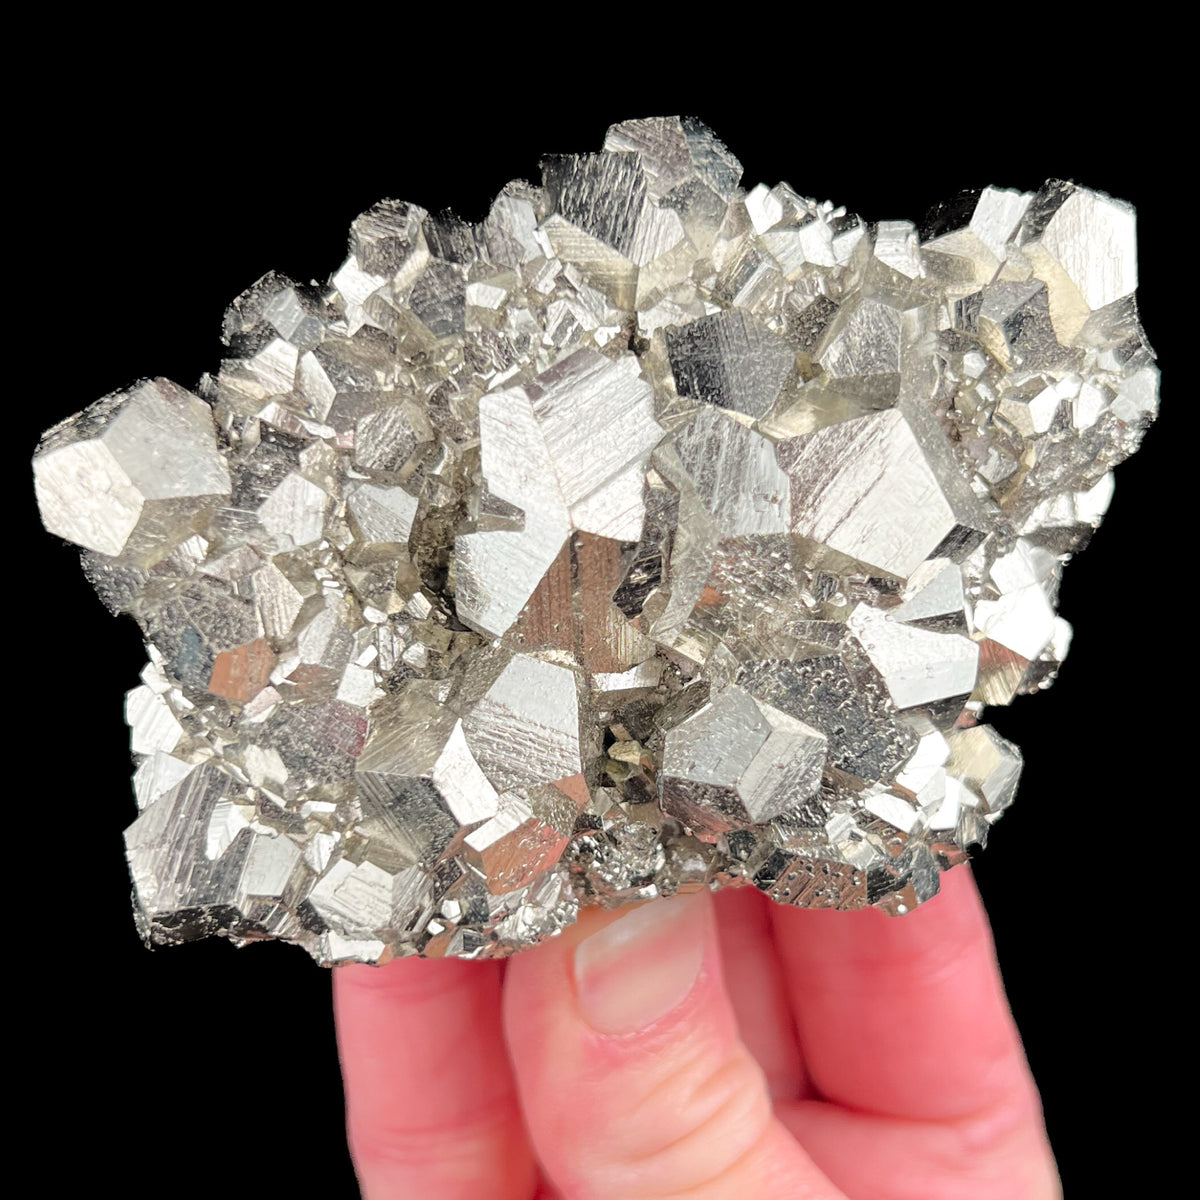 Pyrite Pyritohedron Crystals from Peru